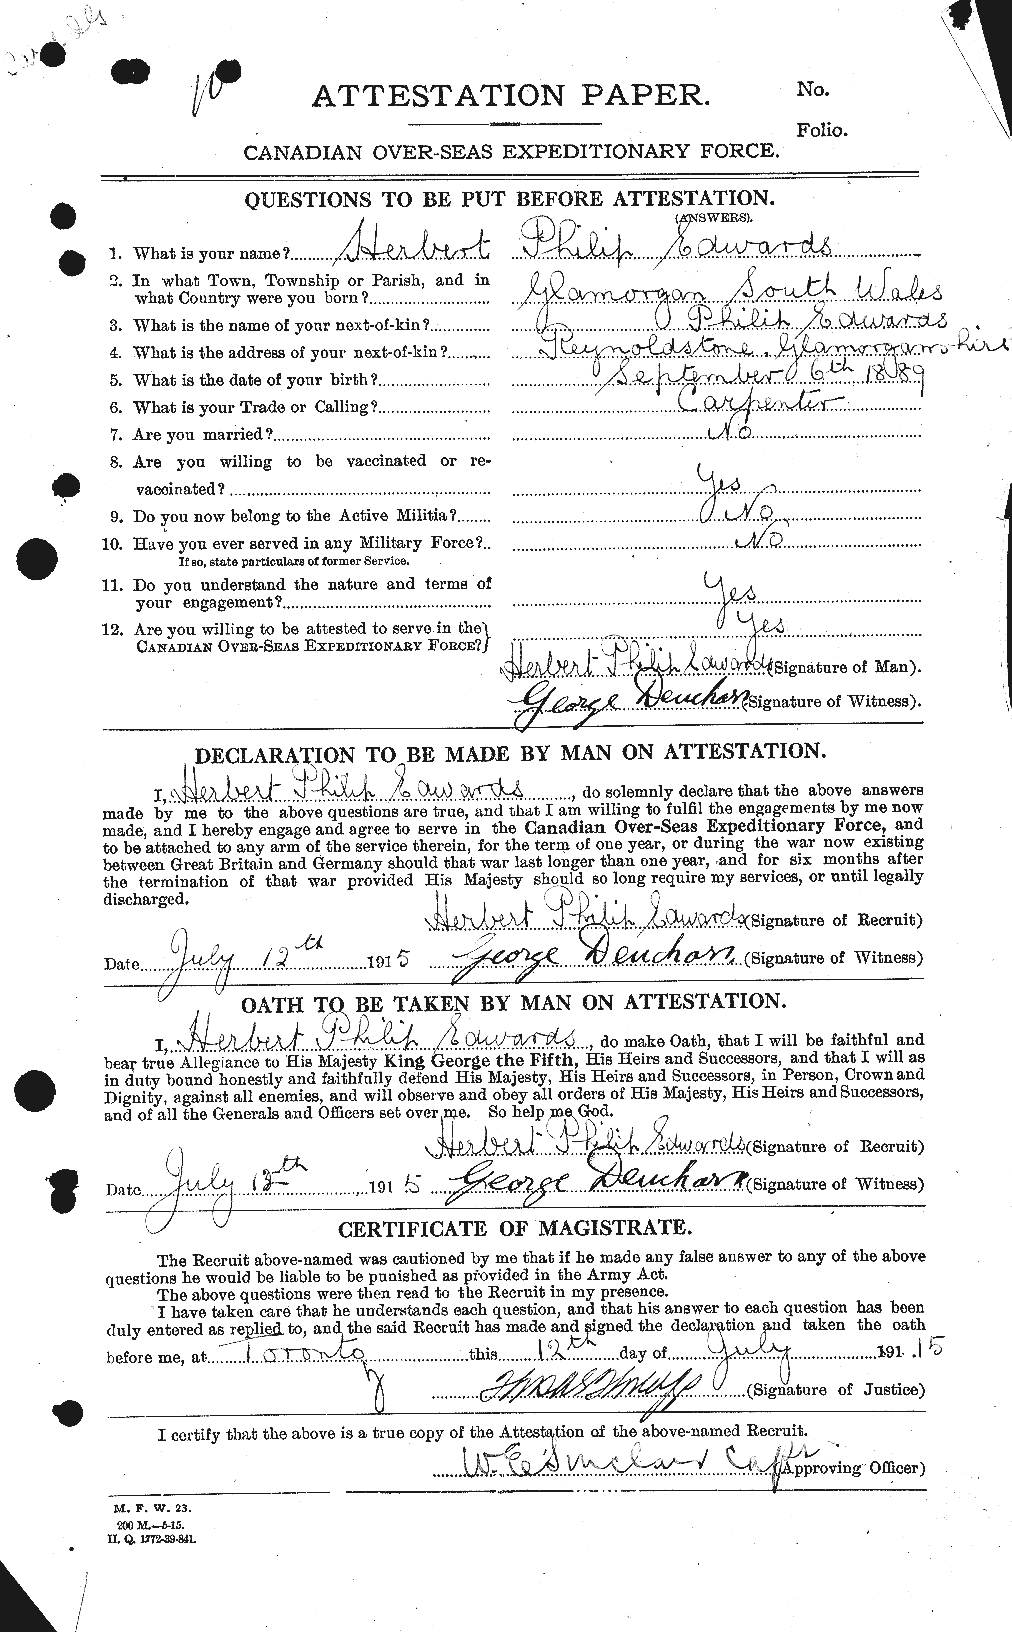 Personnel Records of the First World War - CEF 309780a